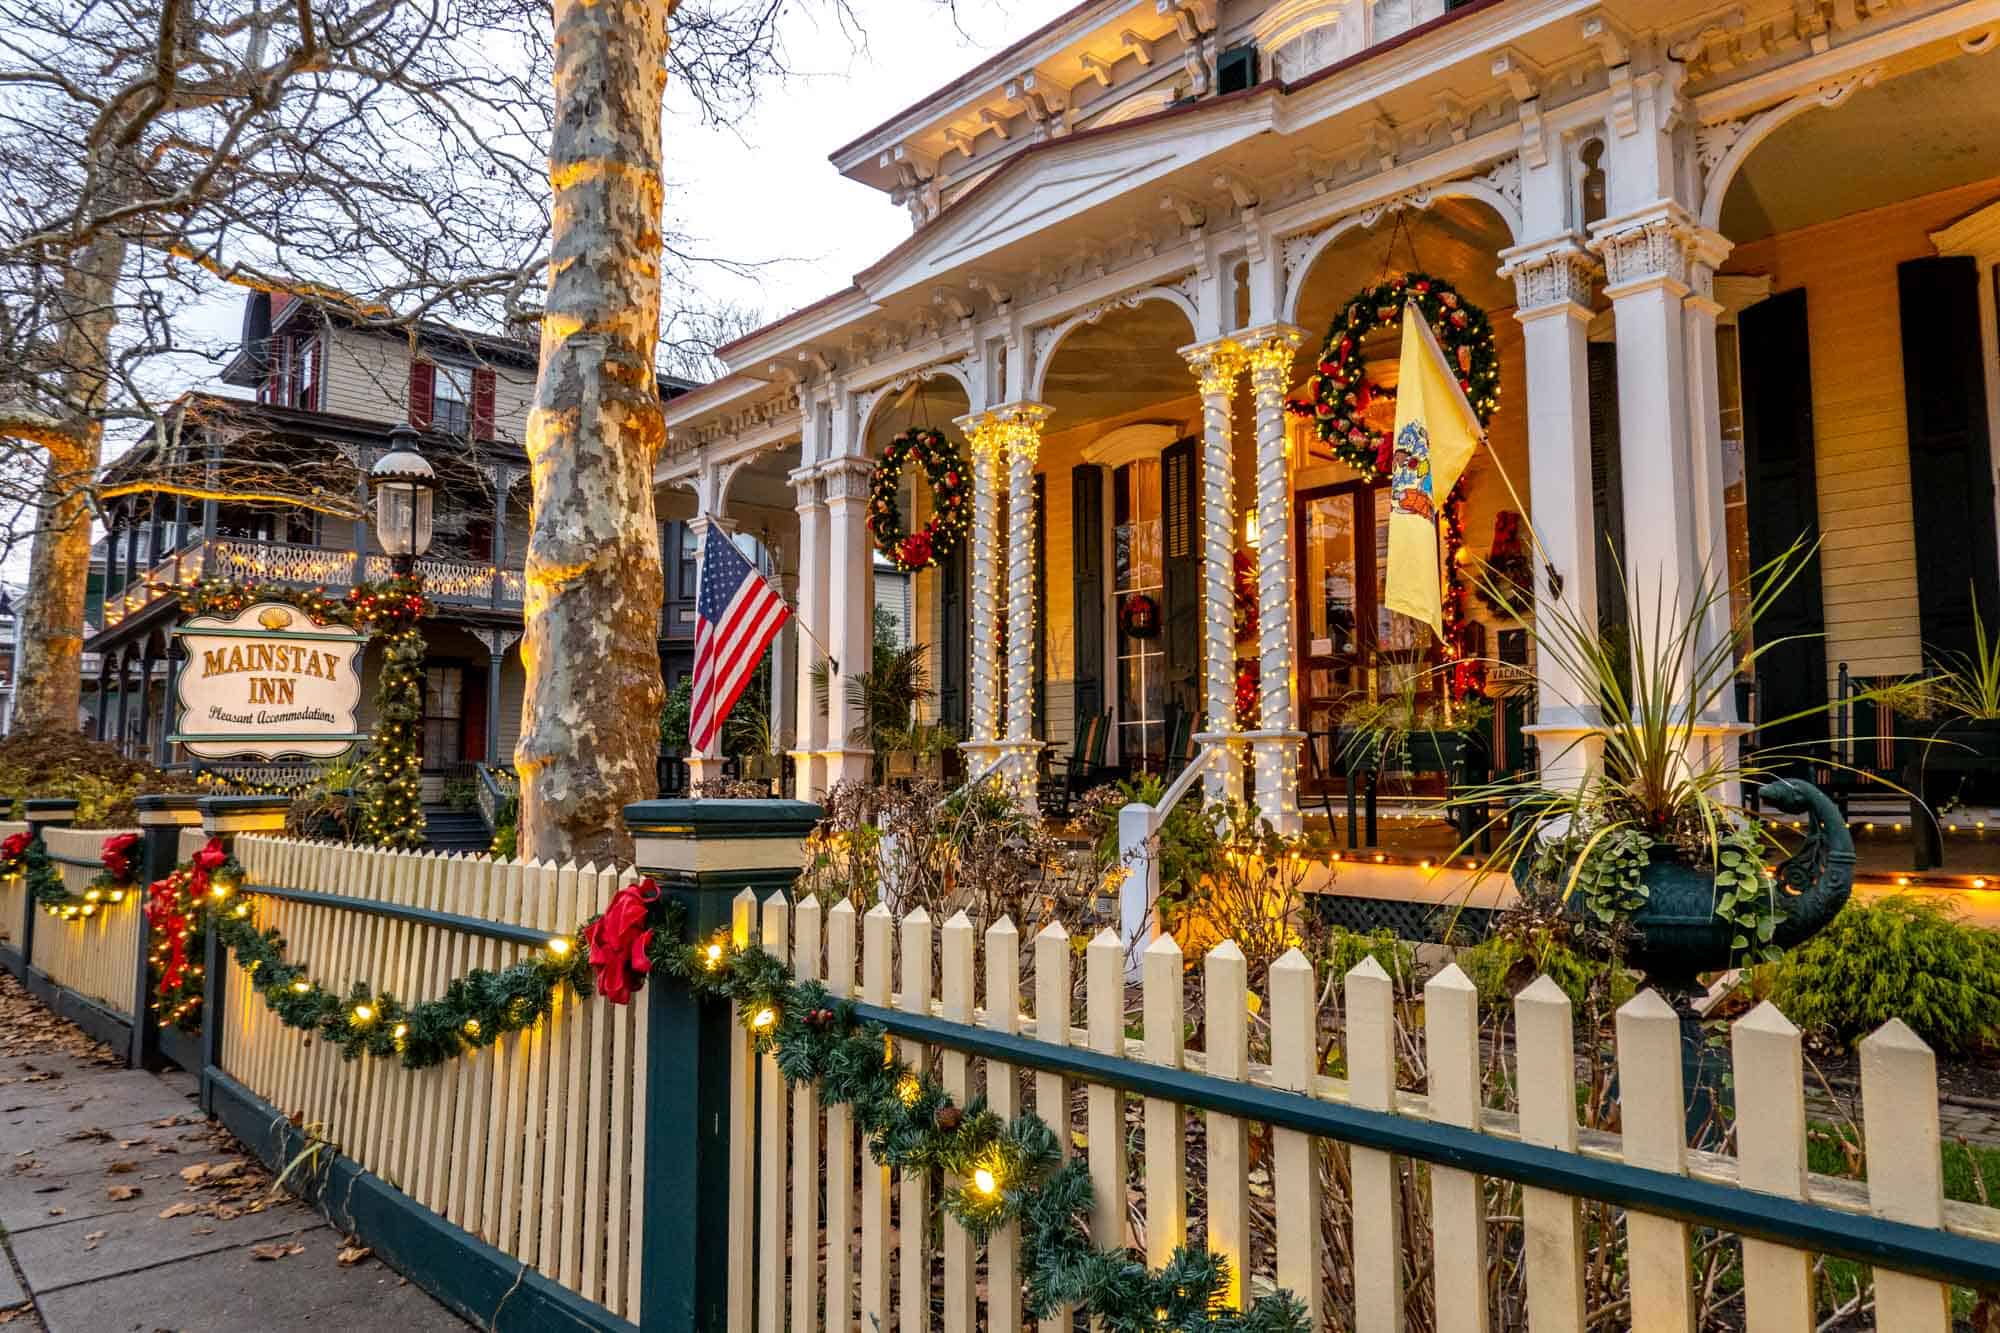 Victorian home decorated with Christmas lights and garland with a sign for the "Mainstay Inn"